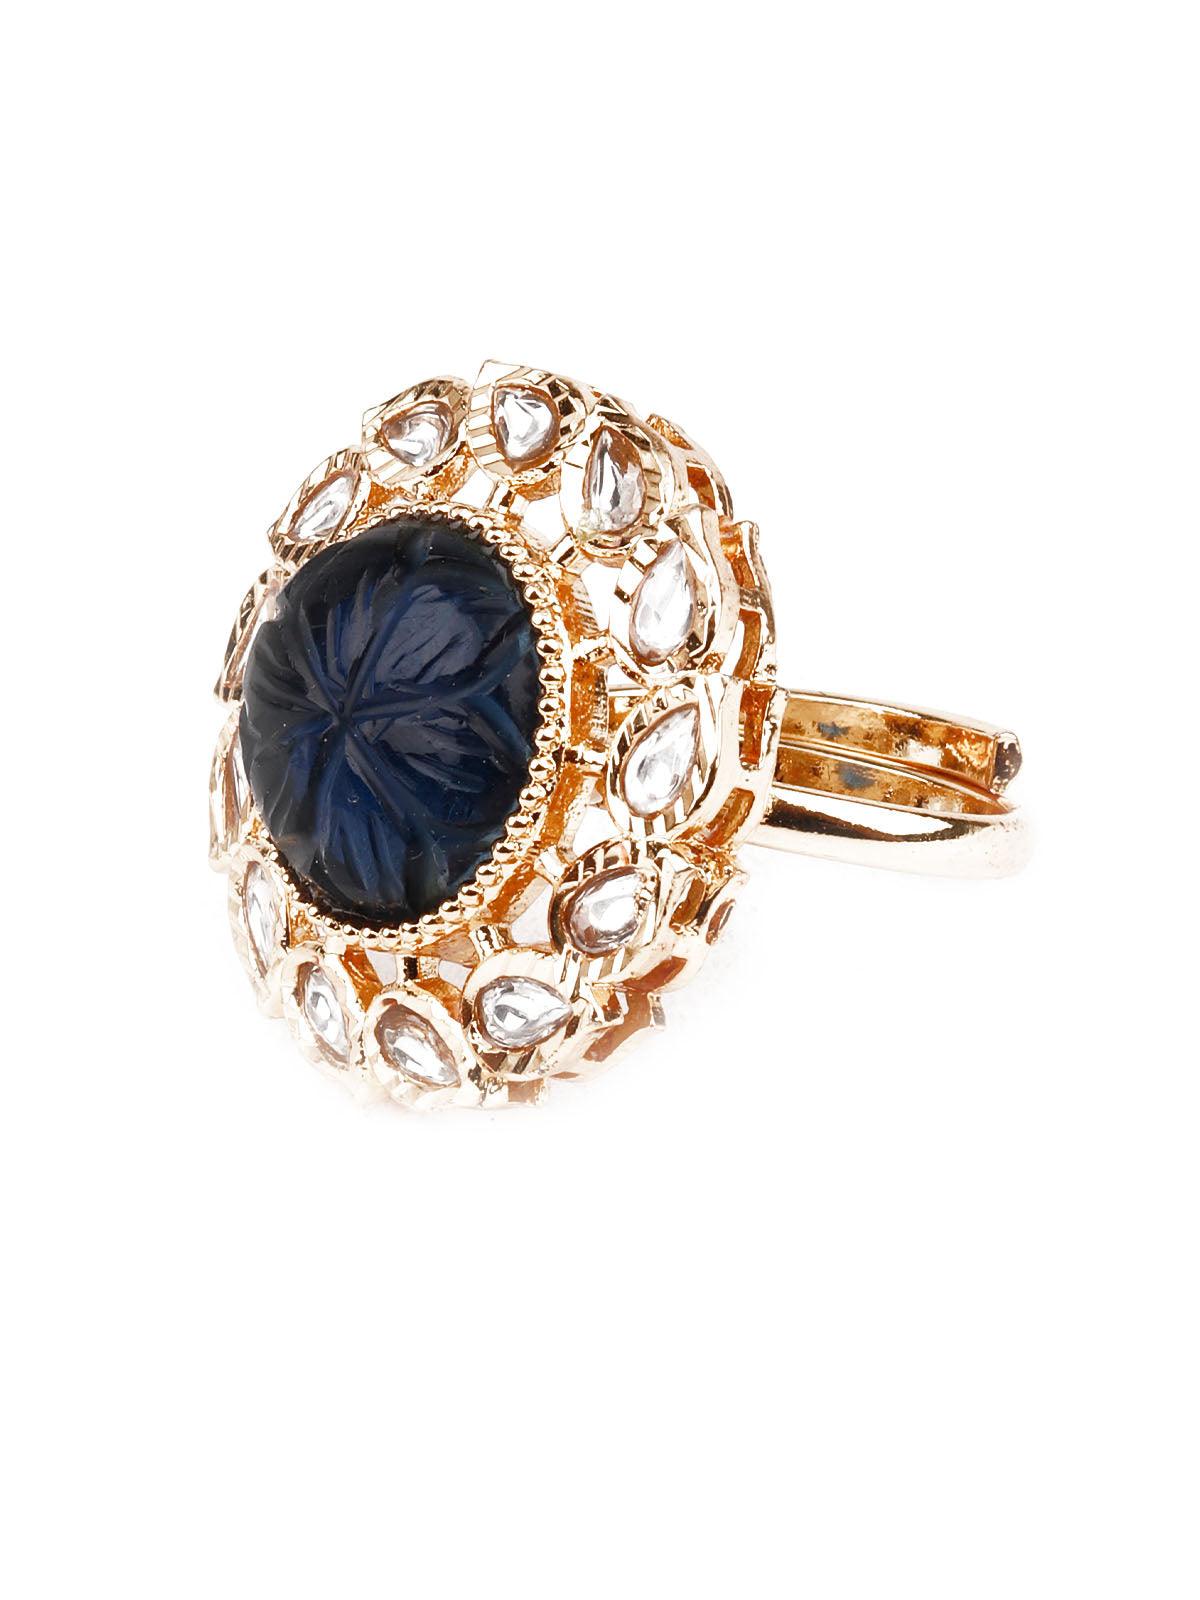 Women's Black And Gold Stylish Ring - Odette